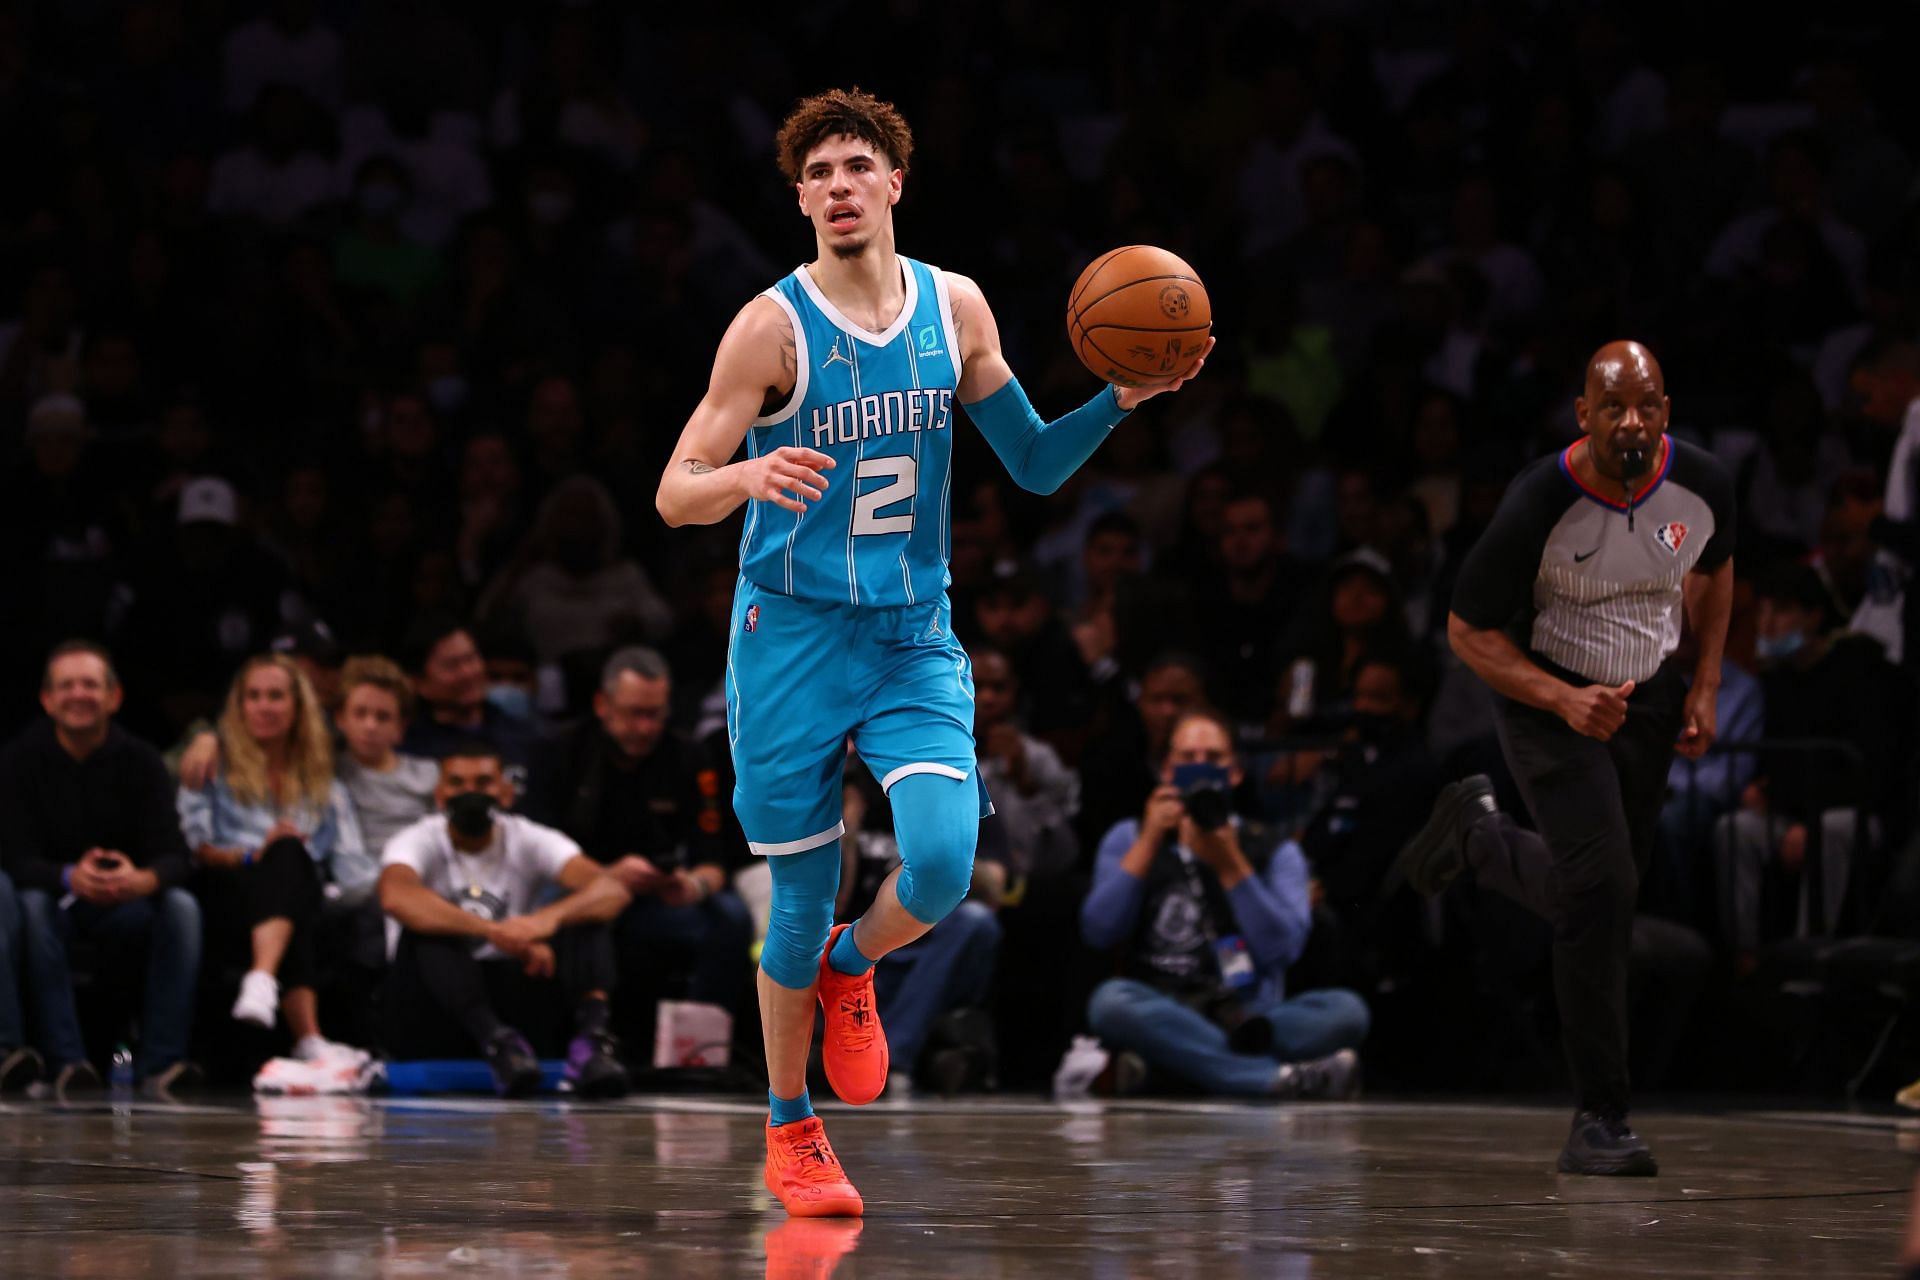 LaMelo Ball brings the Ball up the court for the Charlotte Hornets.